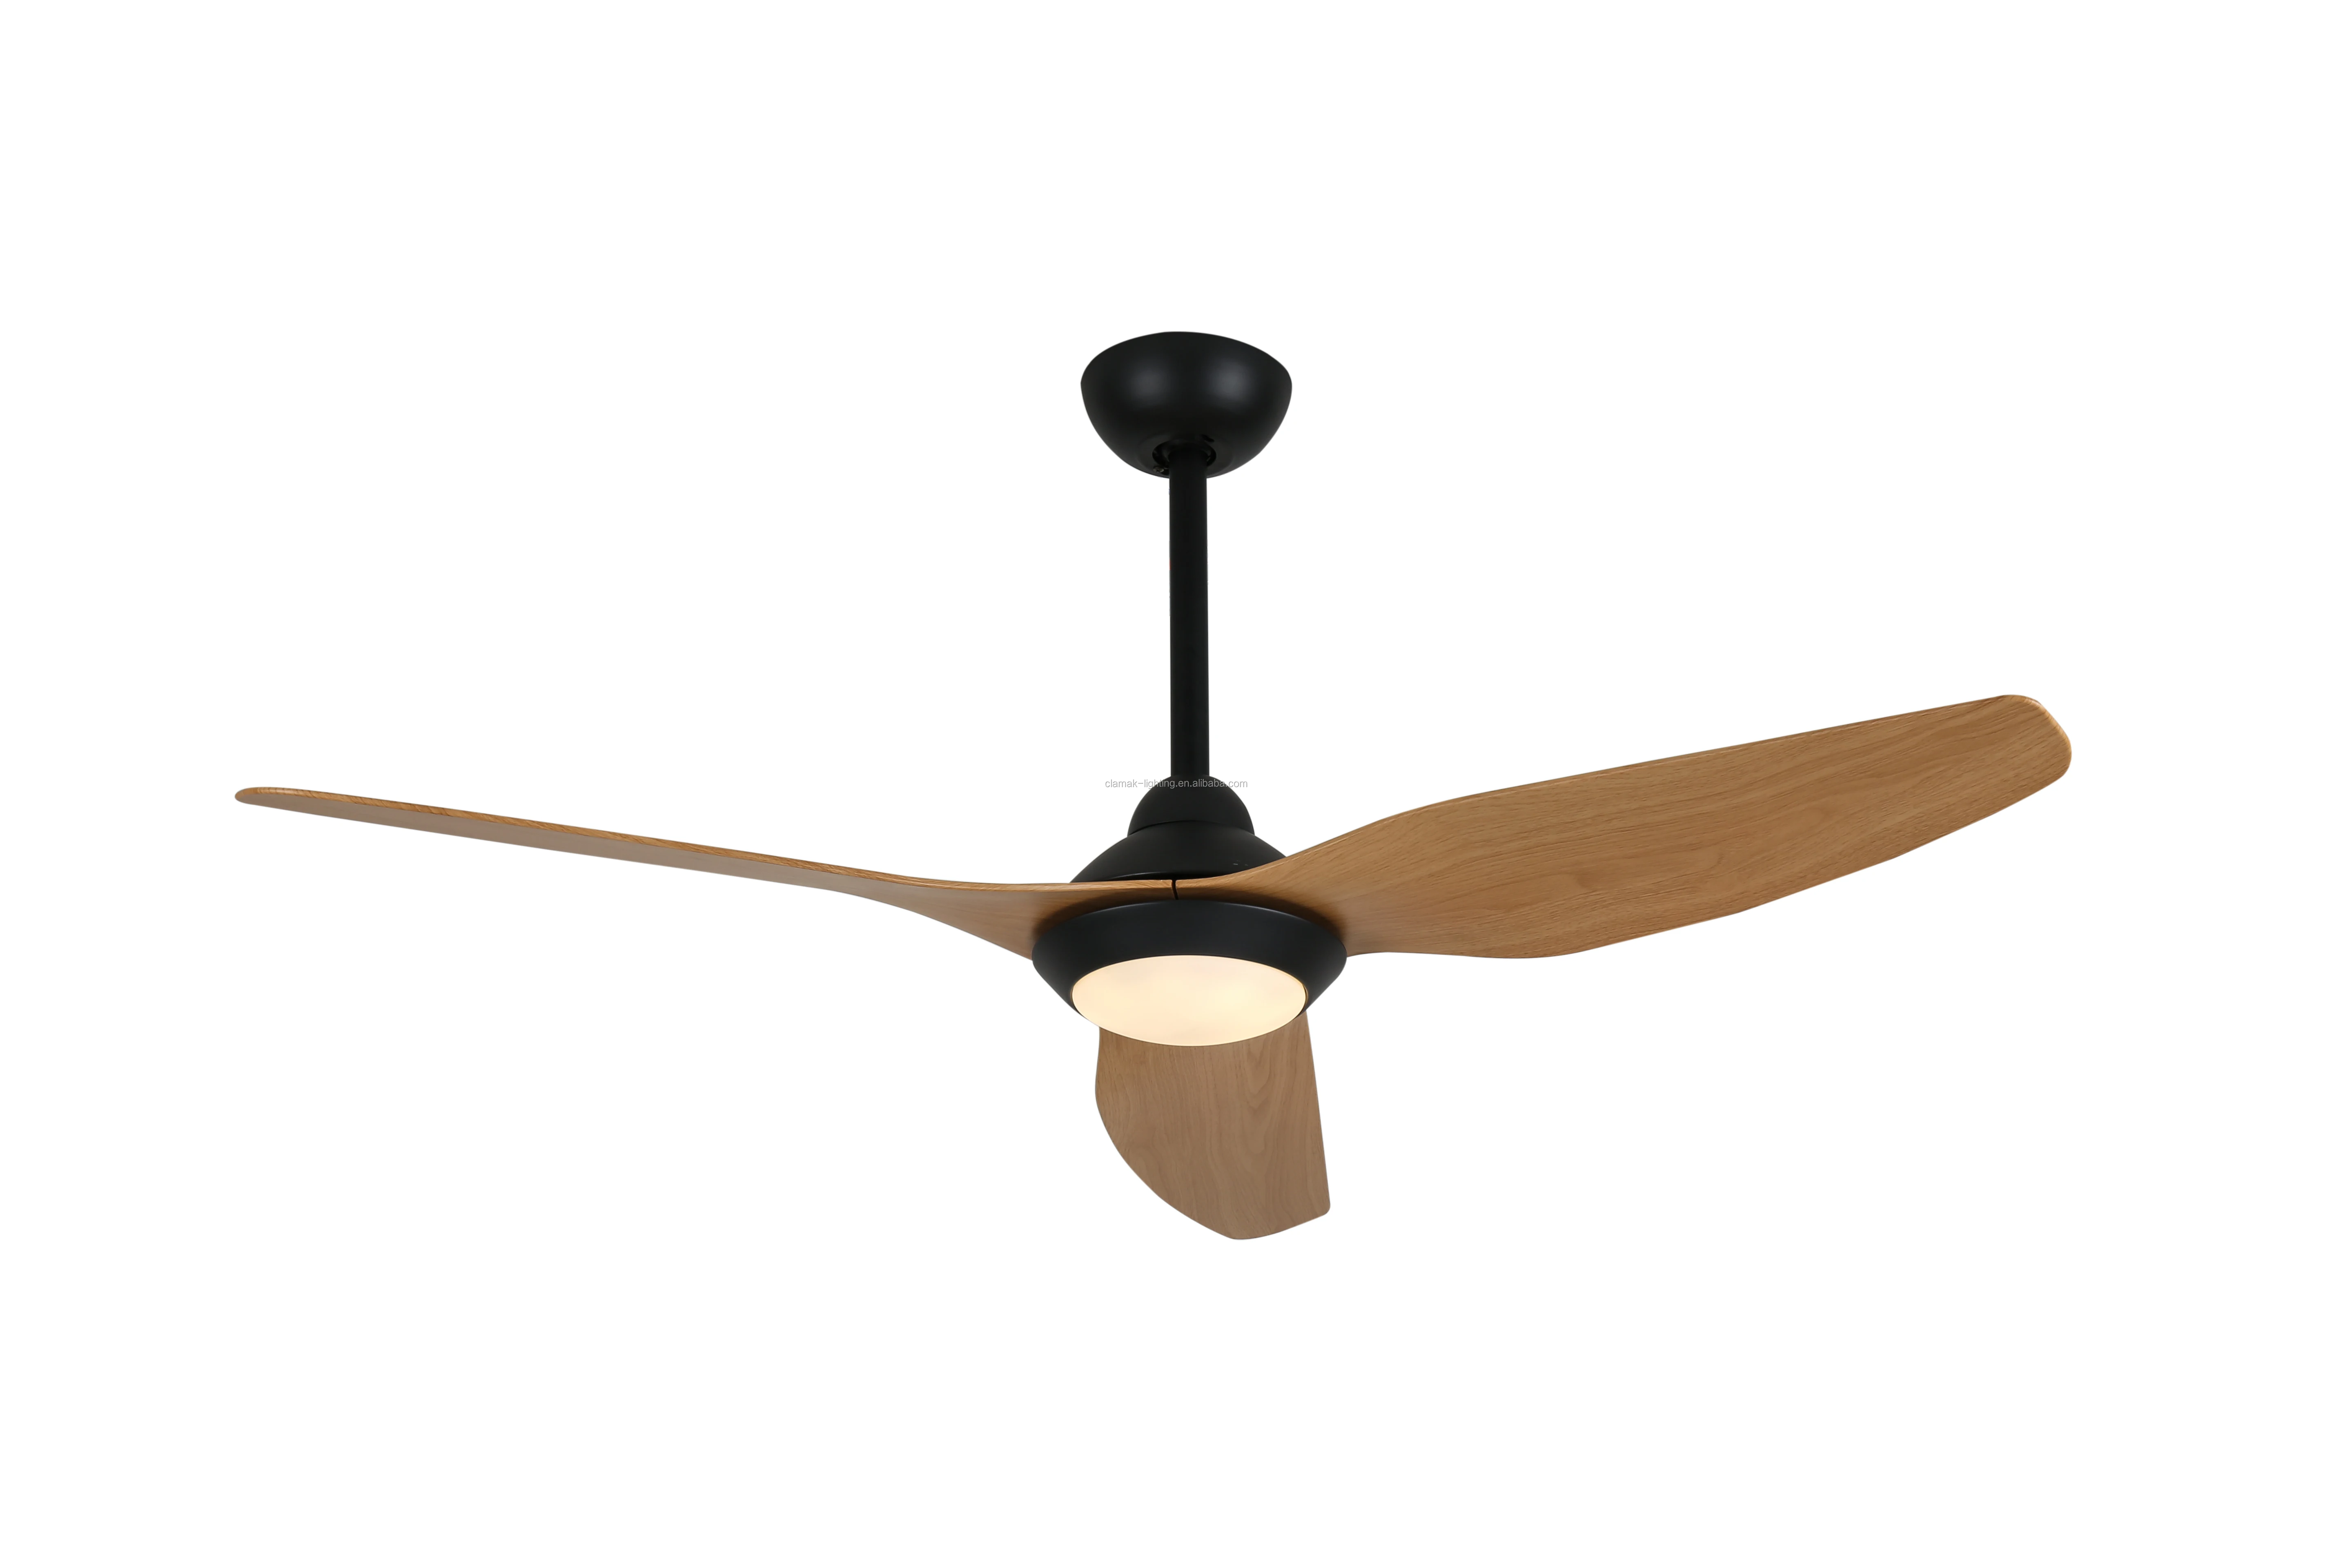 Hot Selling 2020 Fancy Design Cheap Ceiling Fan With Lights Led